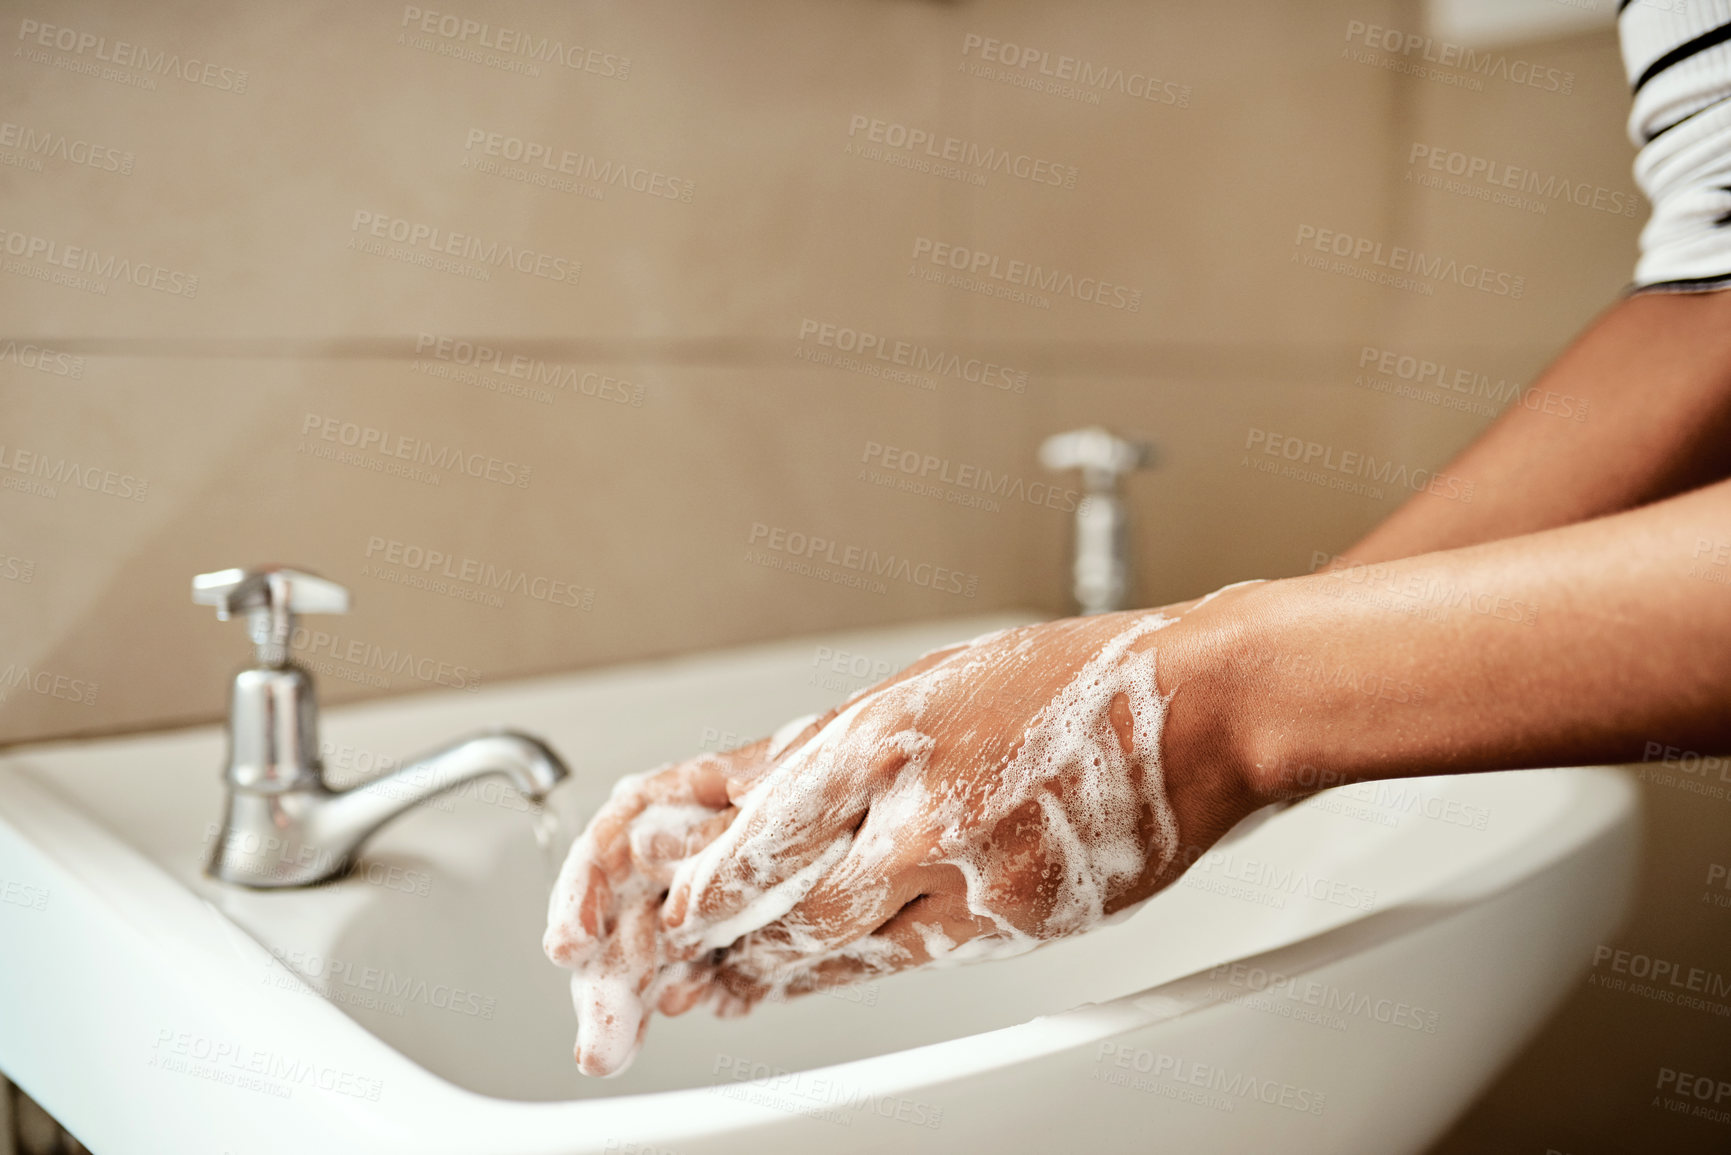 Buy stock photo Cropped shot of a woman washing her hands with soap in the bathroom sink at home